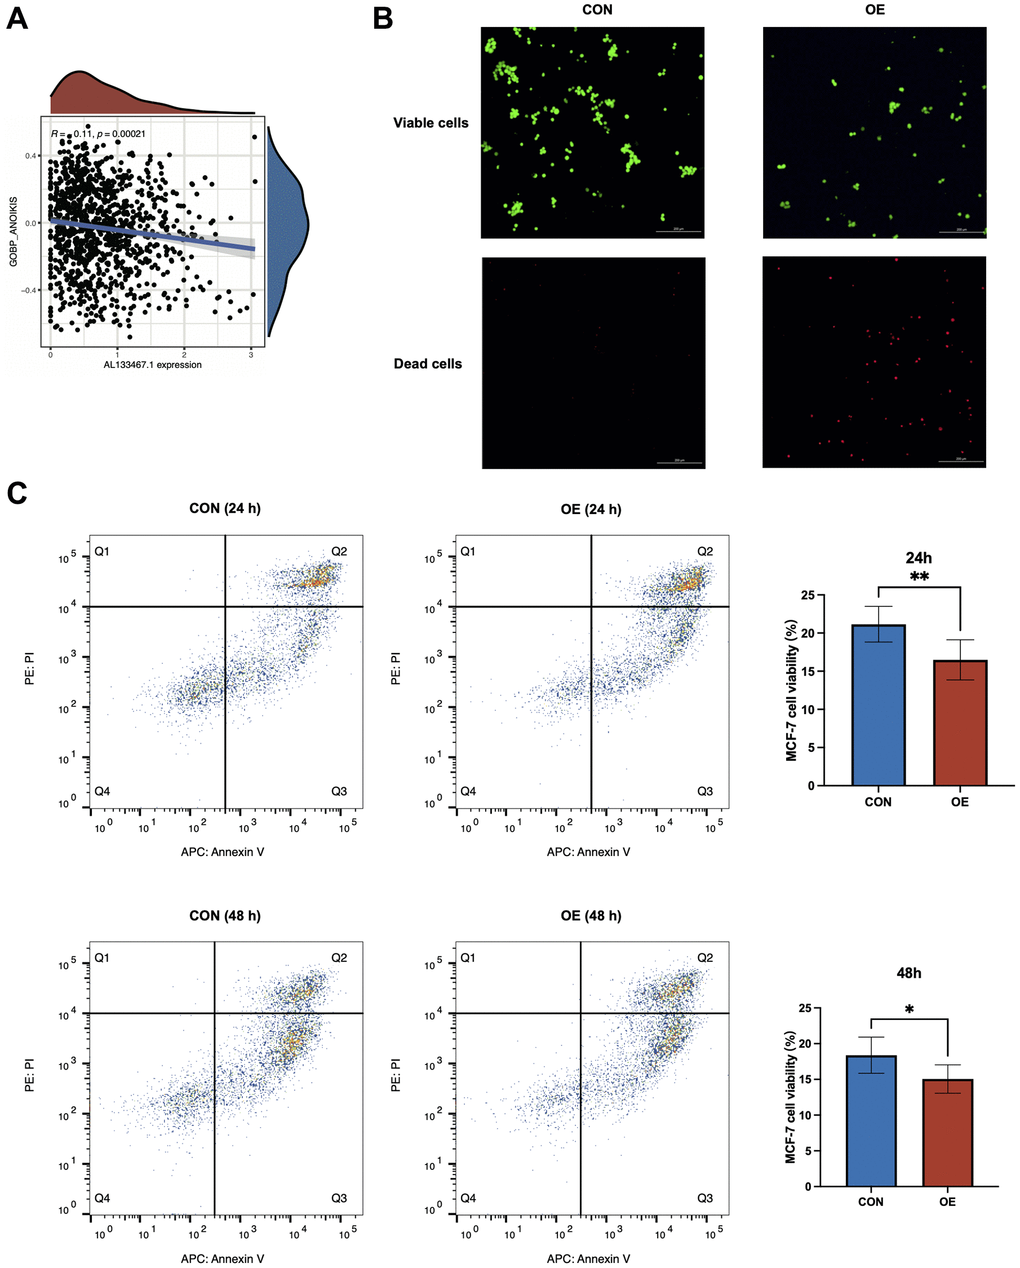 In vitro experiments to investigate the relationship between AL133467.1 and anoikis in breast cancer cells. (A) Correlation analysis between AL133467.1 expression and anoikis. (B) Fluorescence detection to explore the role of AL133467.1 in anoikis regulation in MCF-7 cells; Green: viable cells; Red: dead cells. (C) Quantitative analysis of the effect of AL133467.1 on anoikis using flow cytometry. Statistical significance symbols: ns, p ≥ 0.05; *p **p ***p 